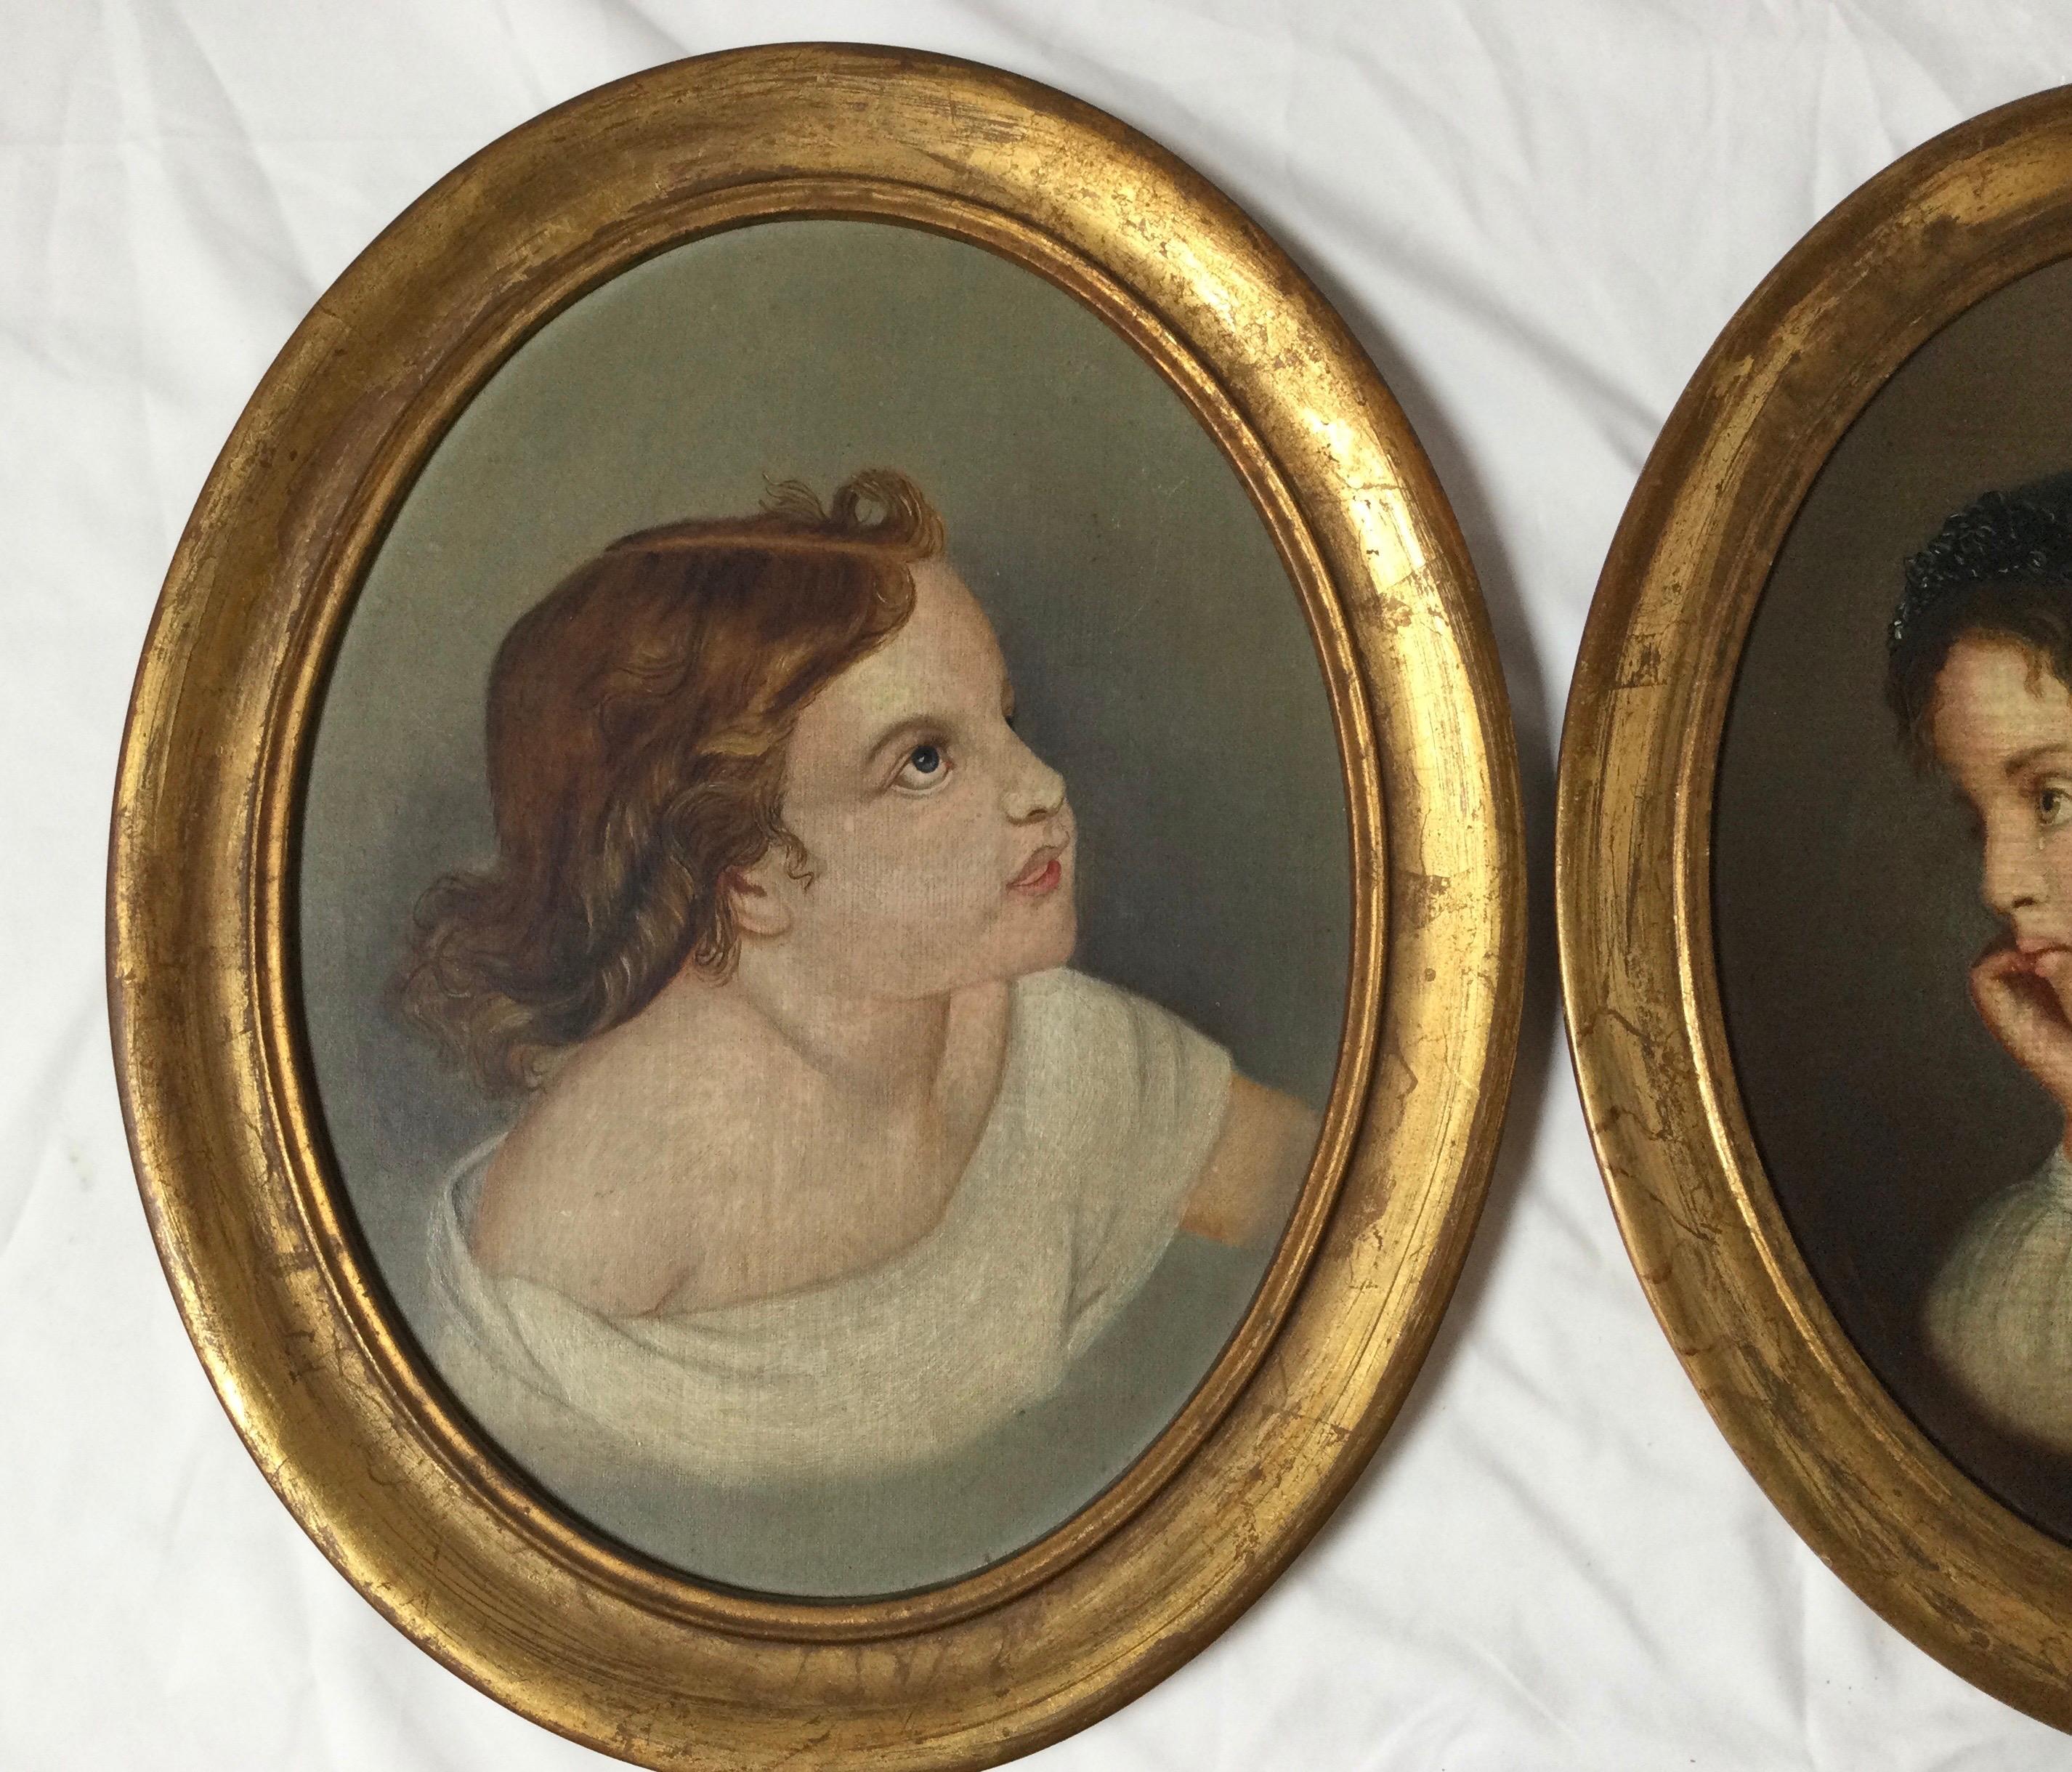 A pair of oval gilt framed portraits of children, probably siblings, dated on back 1800. Original well cared for condition.